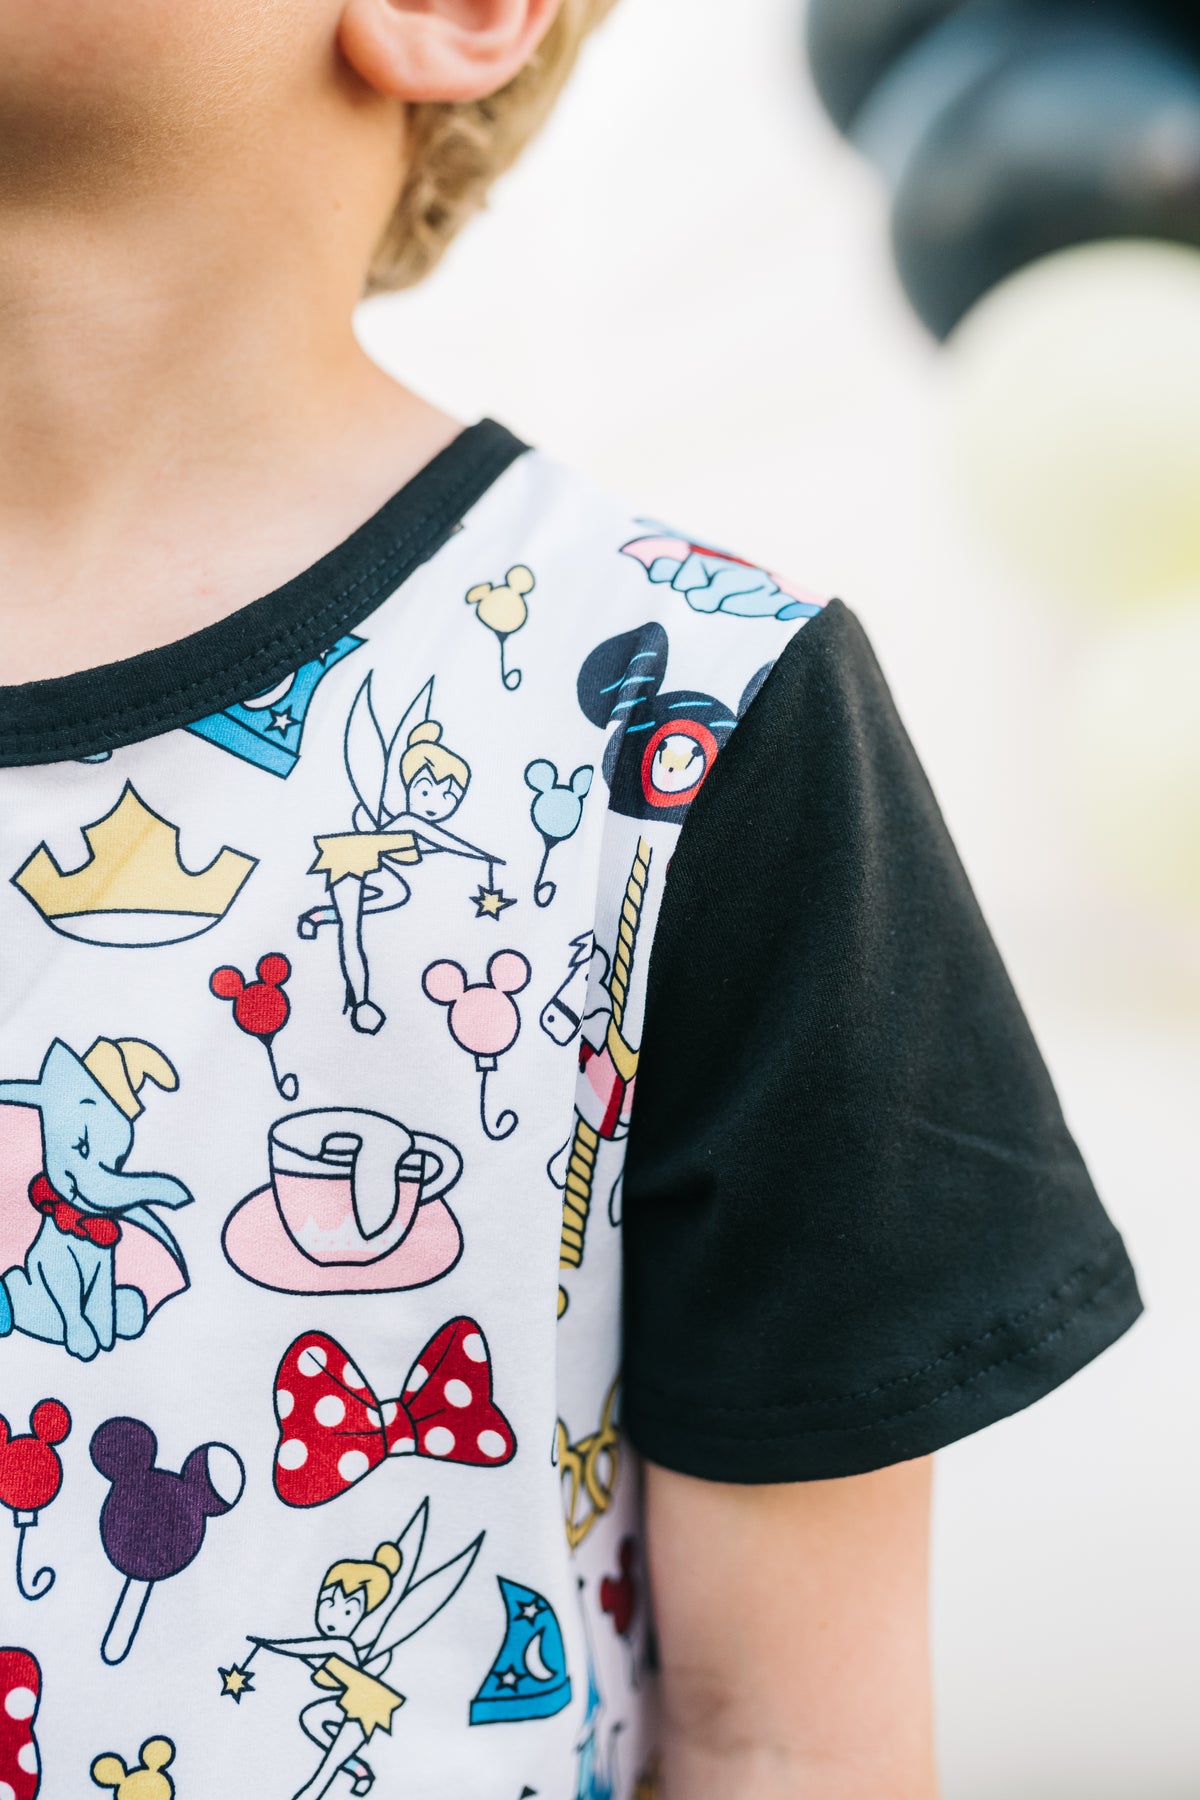 The Parks Tee | Child